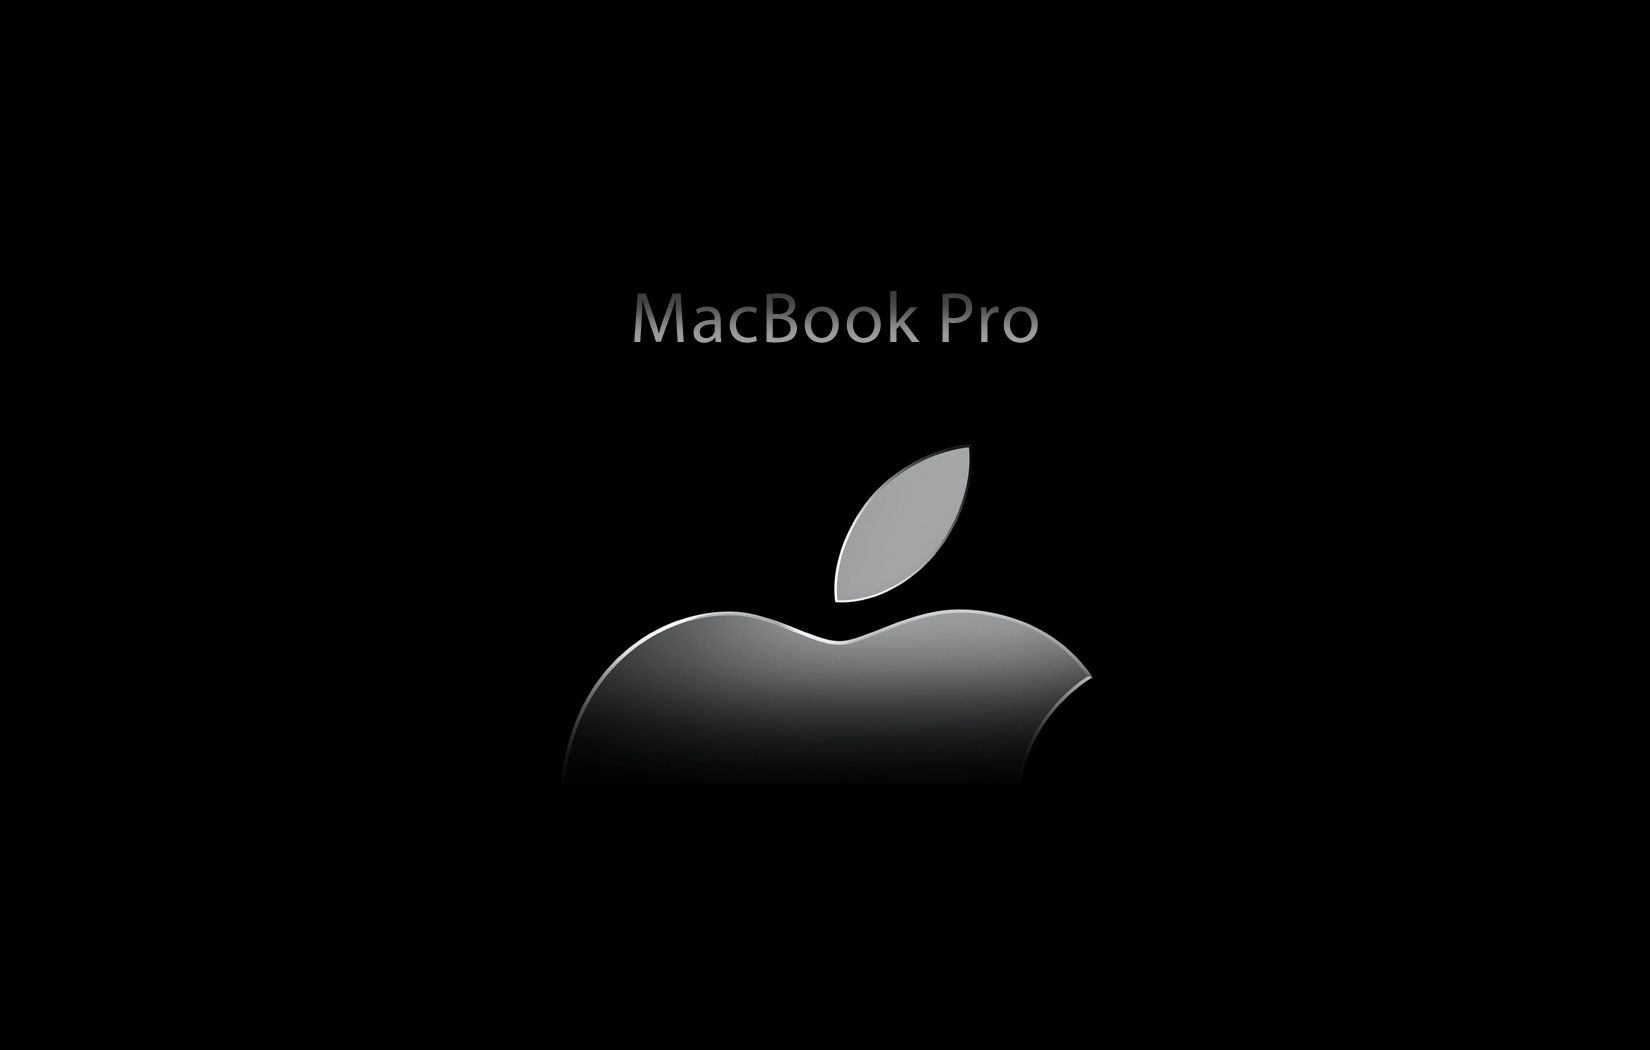 MacBook Pro by AndrewToPhotography on DeviantArt